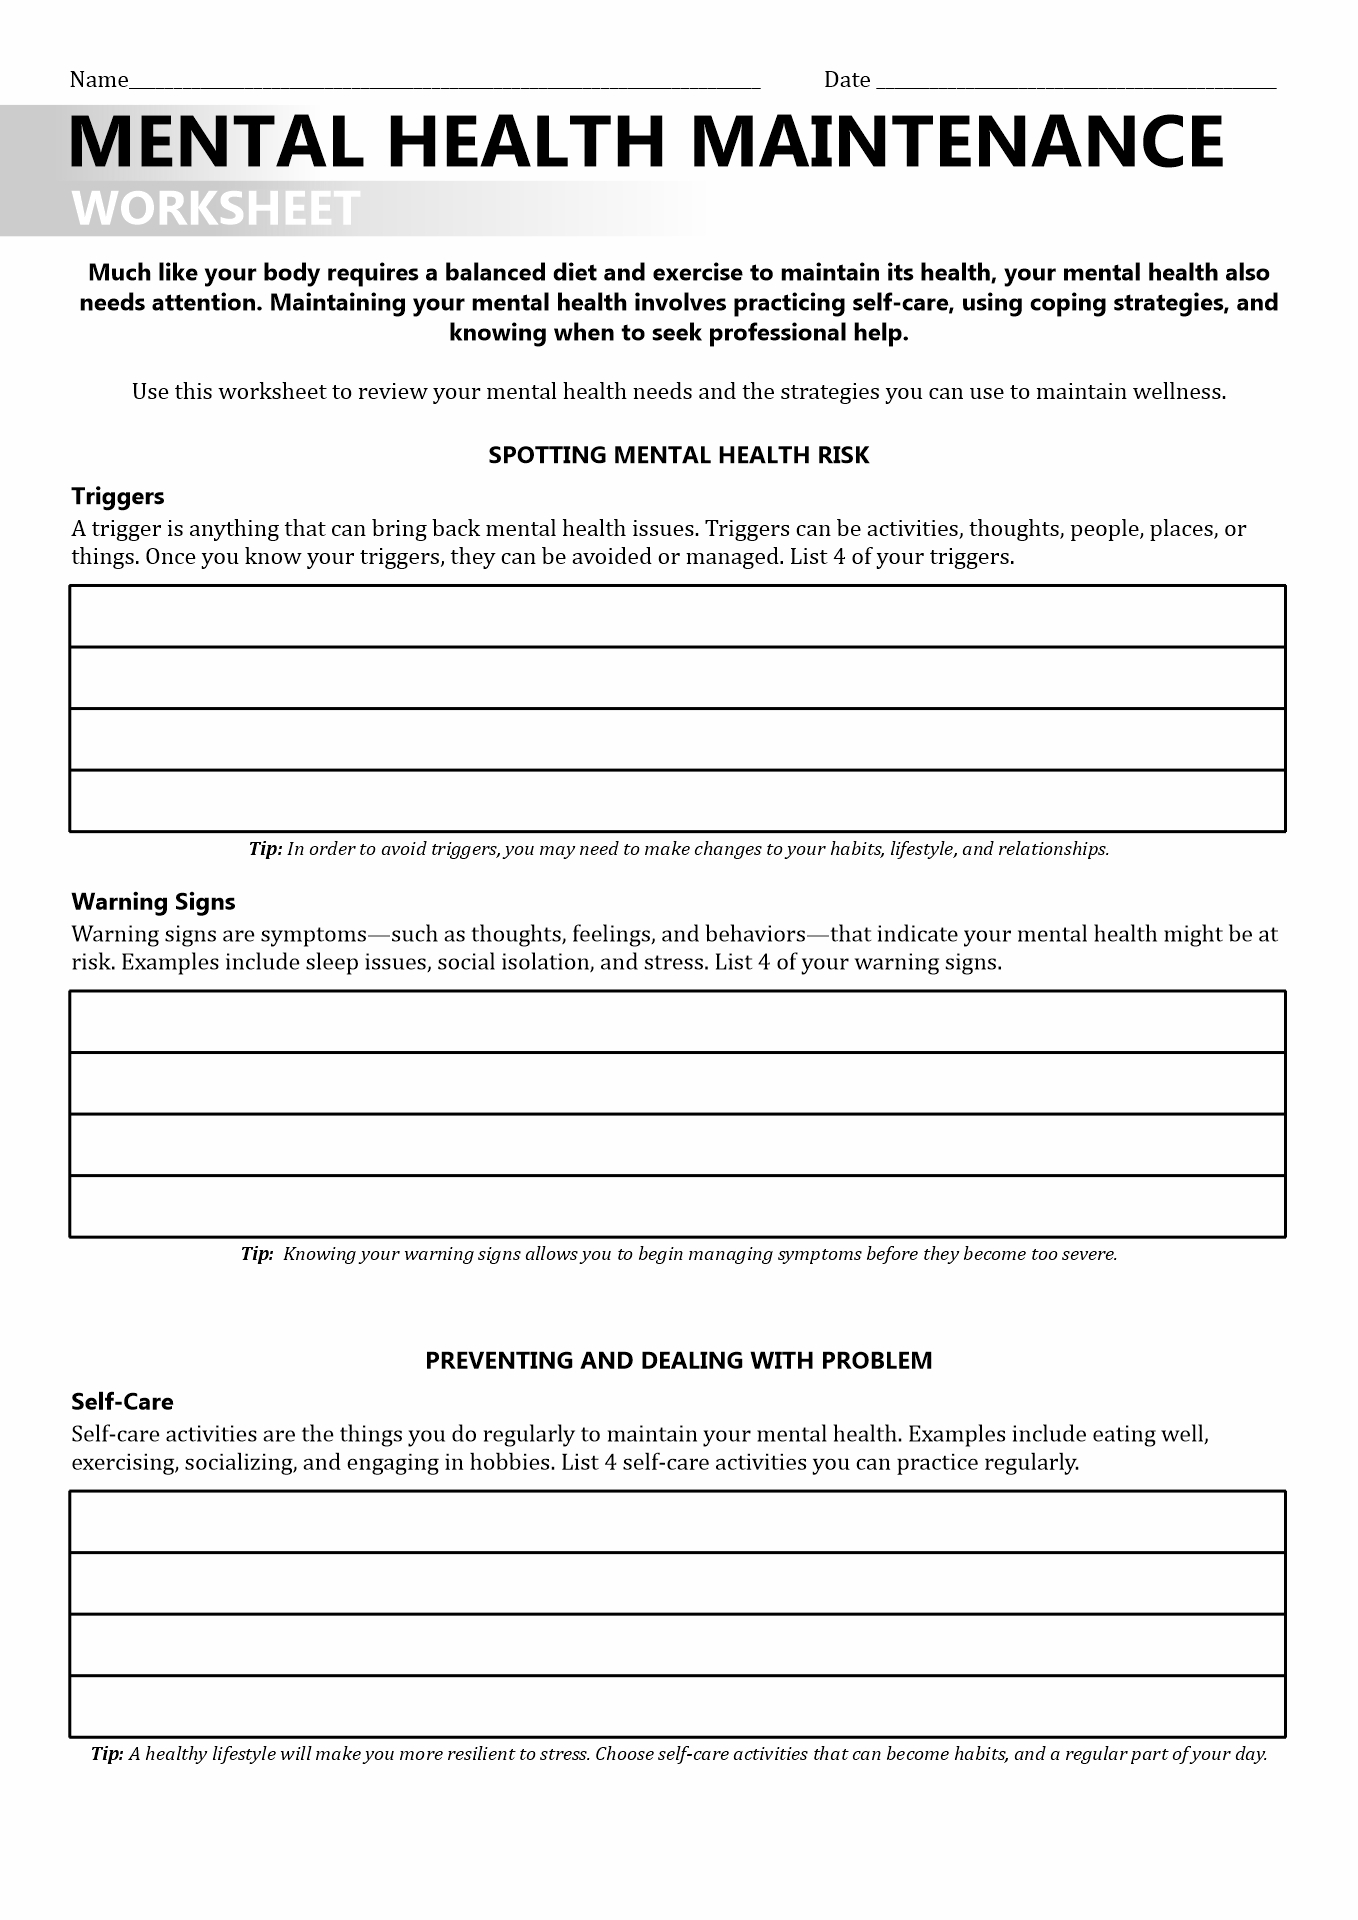 16 Best Images of Recovery Support Worksheet - Early ...